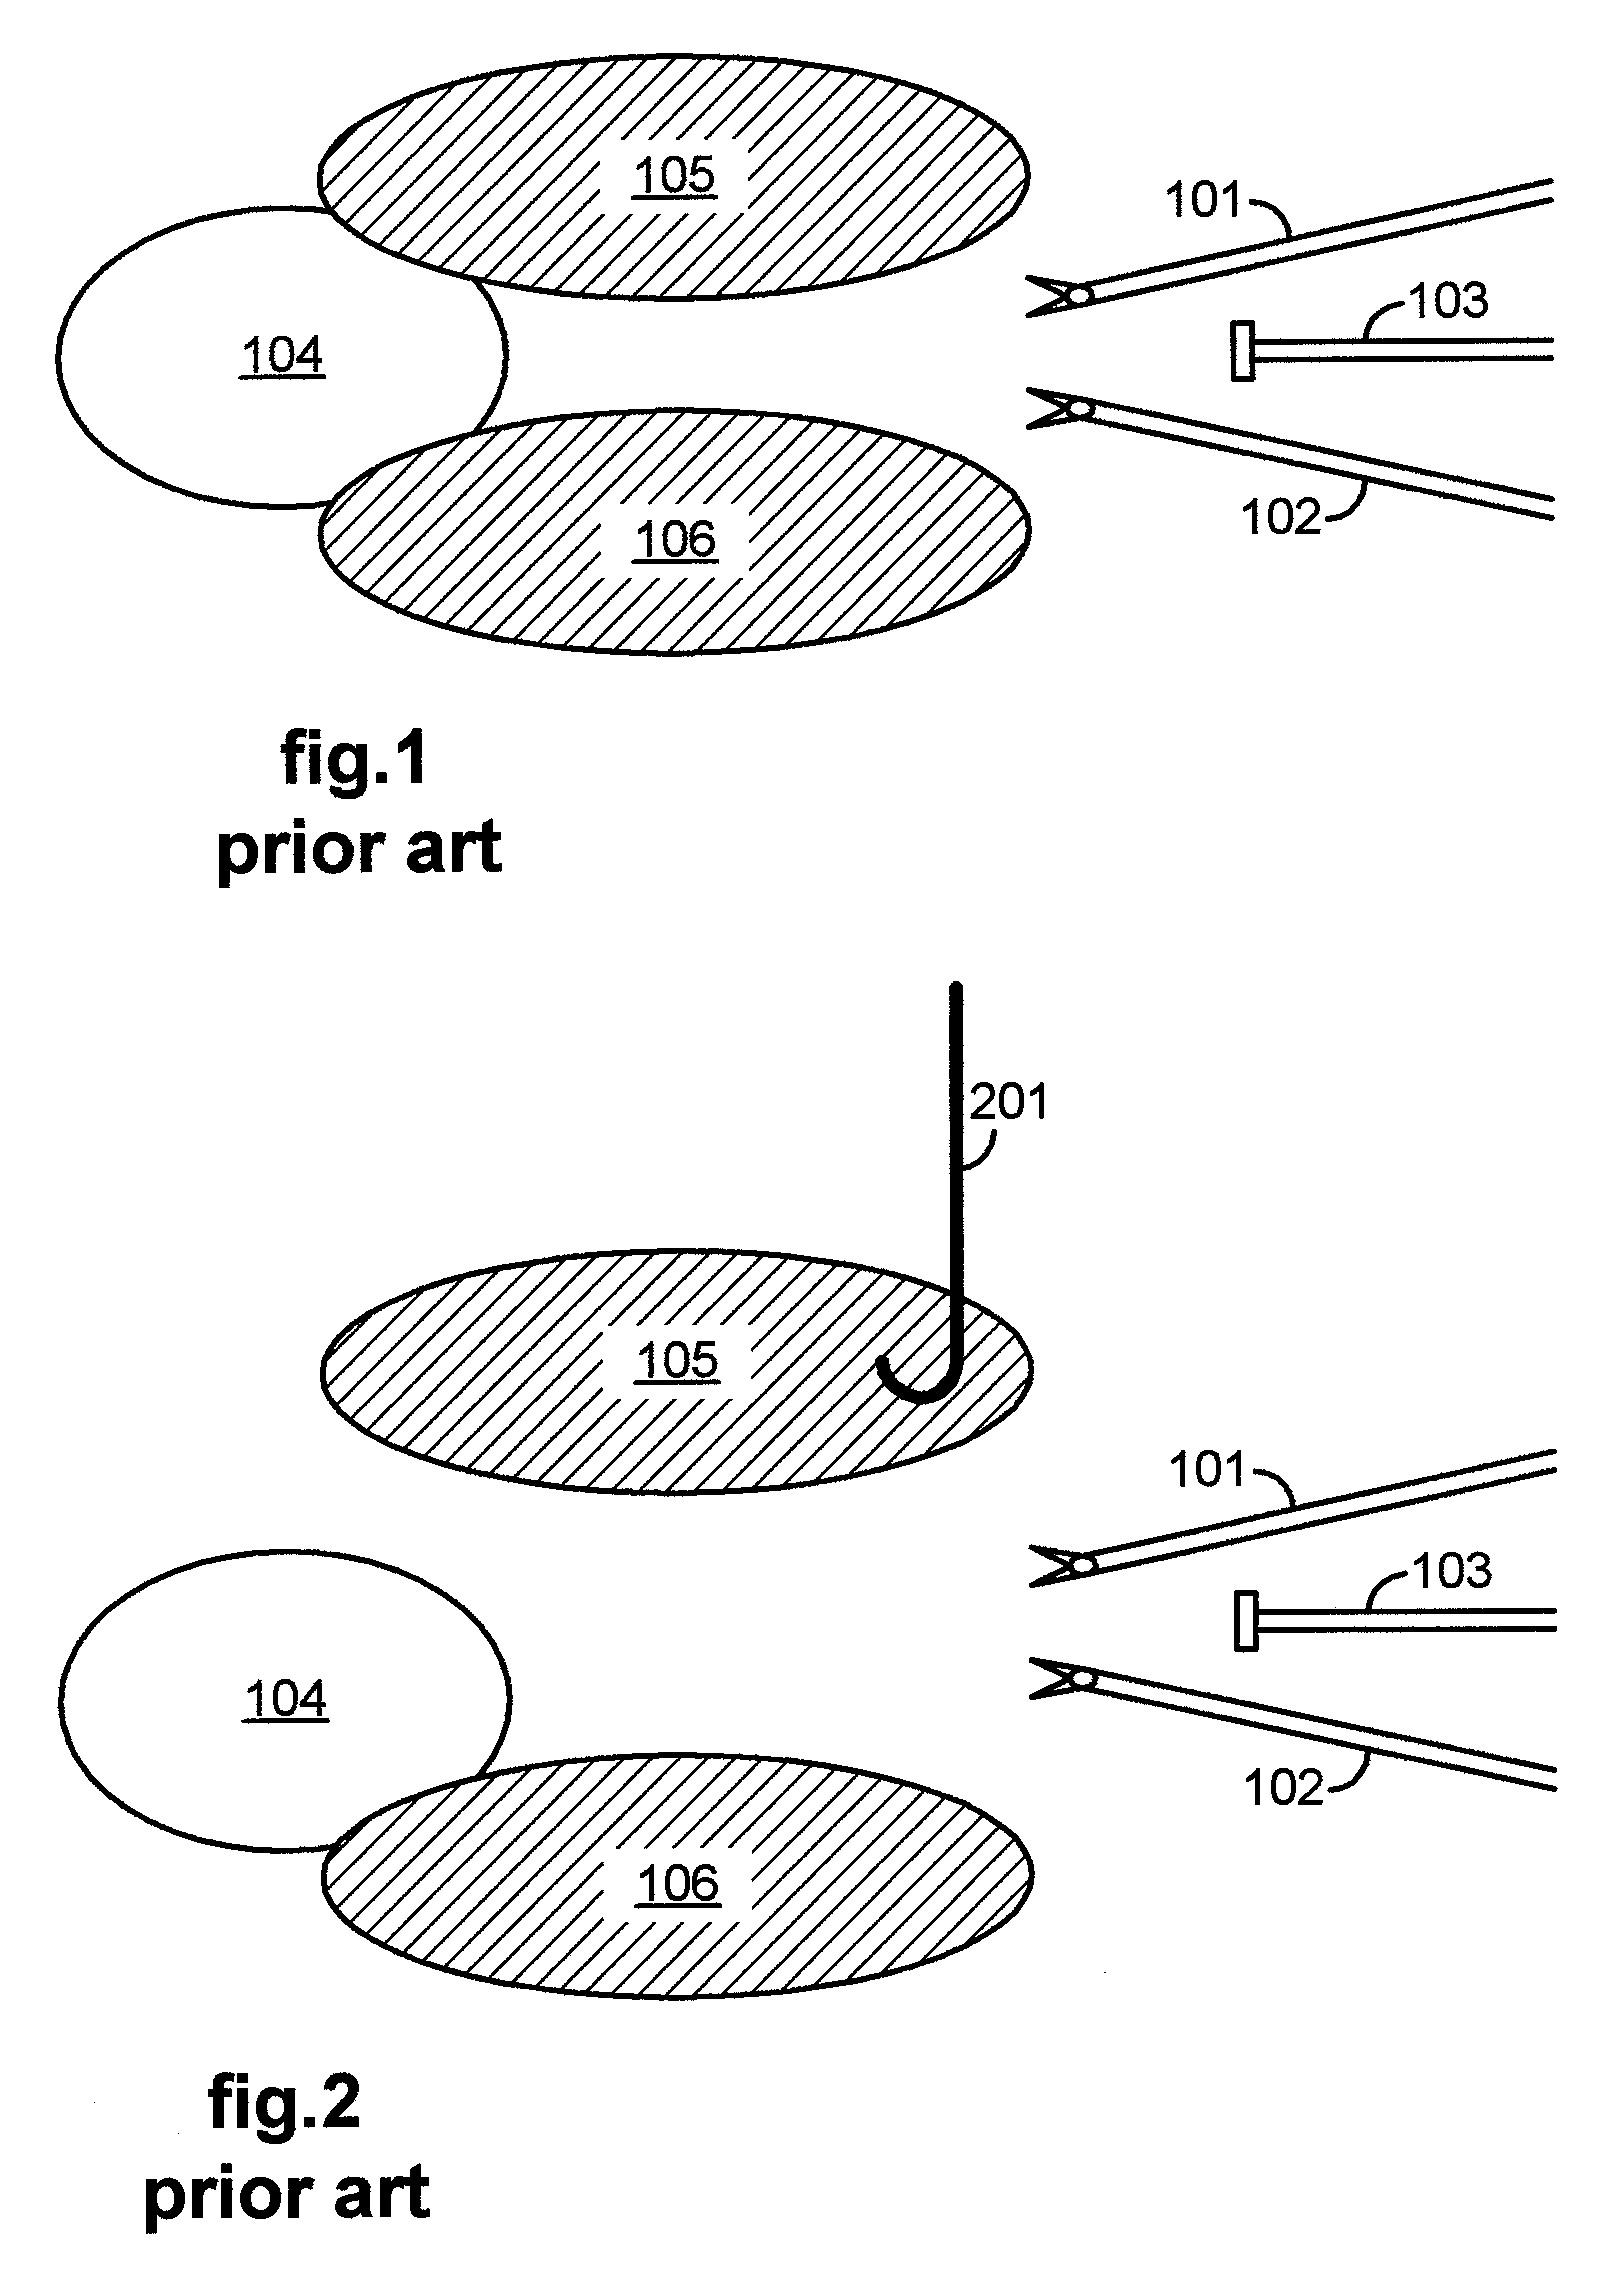 Retraction of tissue for single port entry, robotically assisted medical procedures